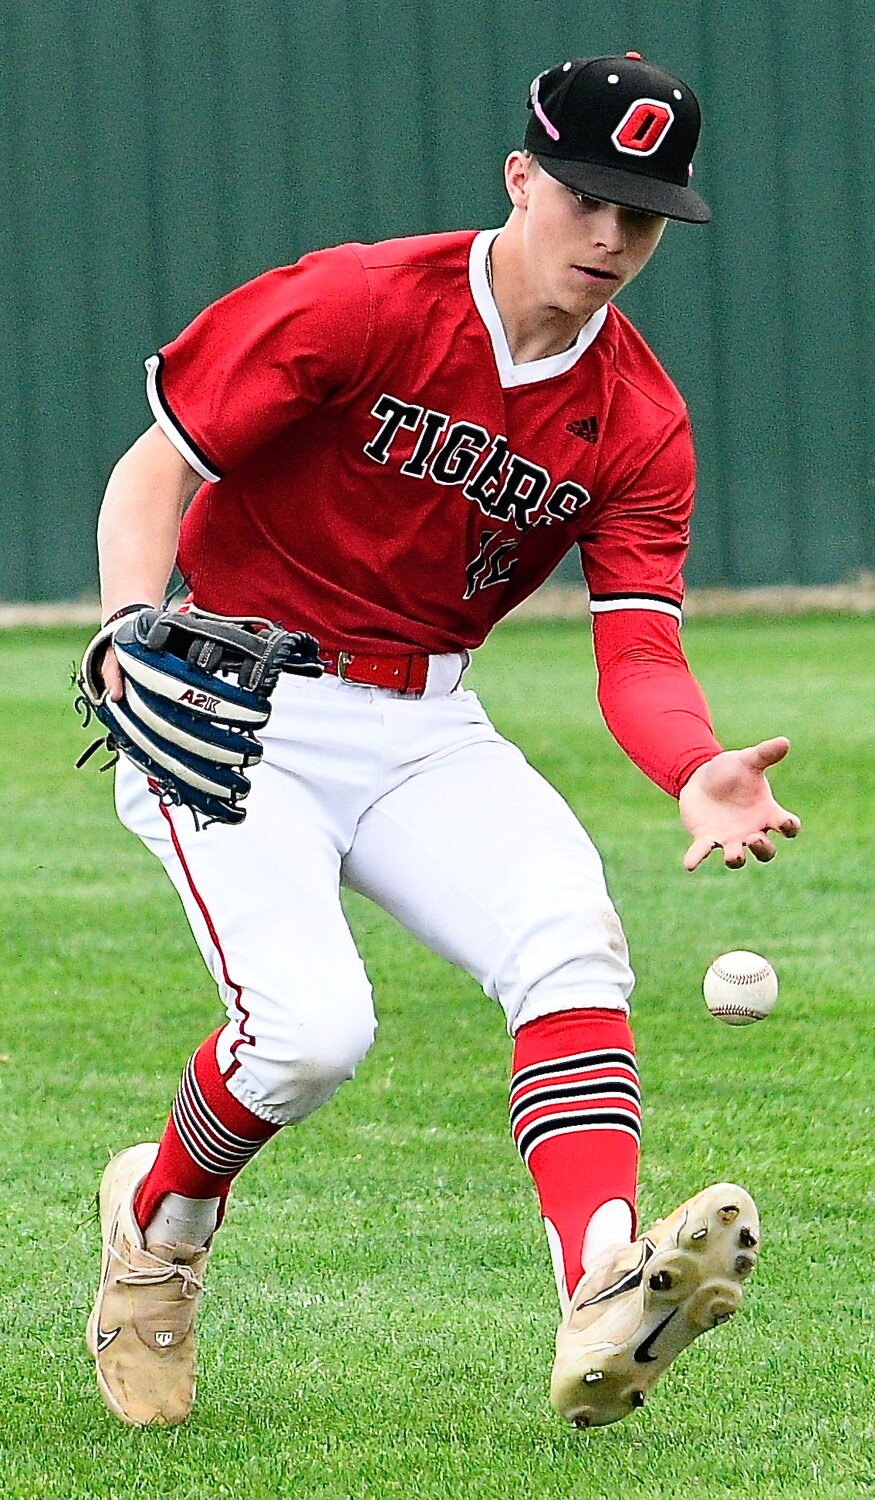 OZARK'S RYLAN SUTTON tracks down the ball in right field.